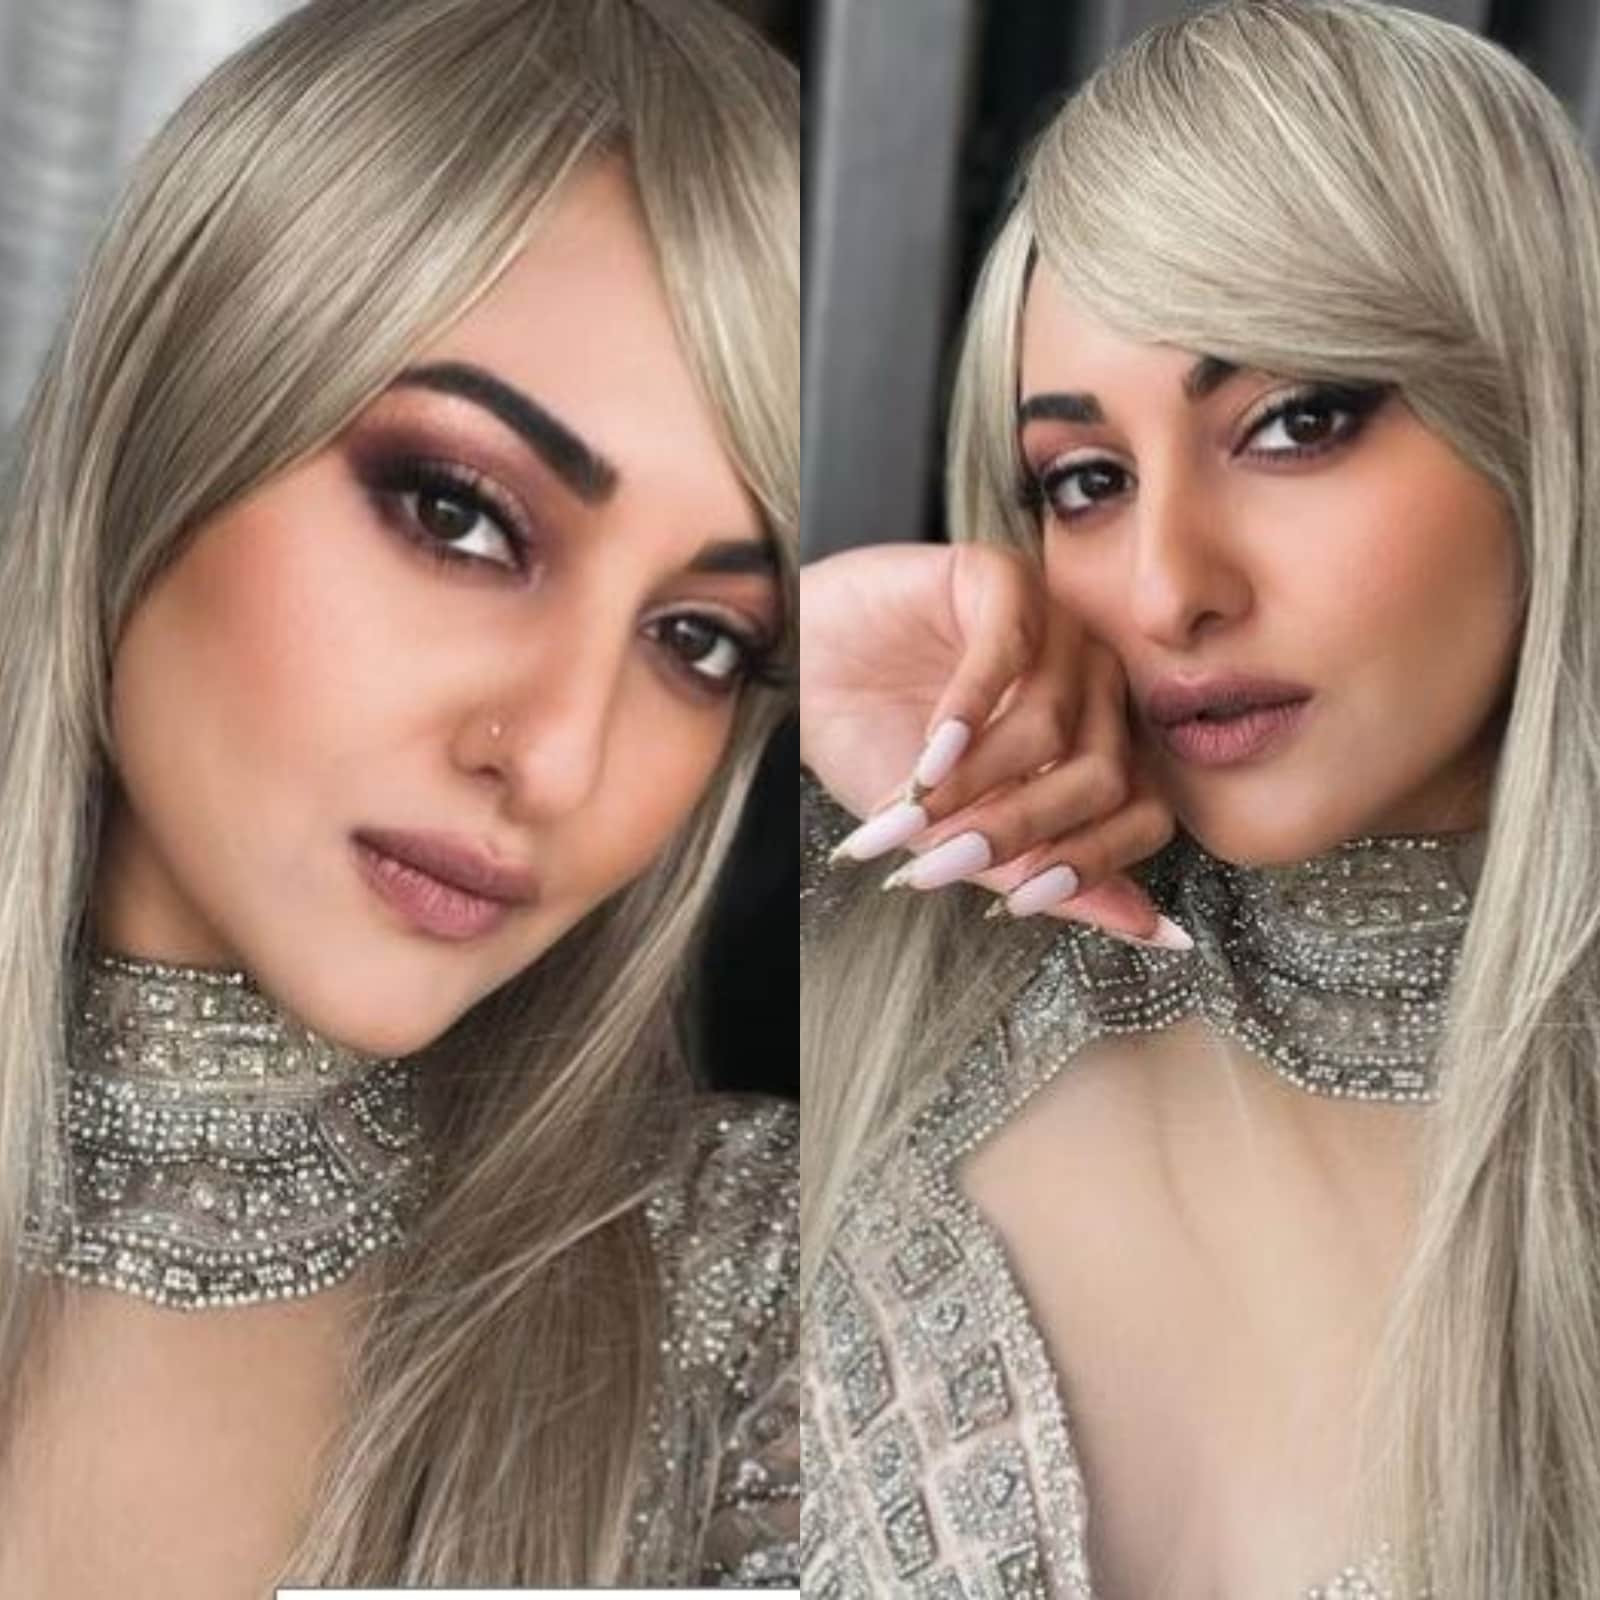 Sonakshi Sinha Porn Fuck Pussy - Sonakshi Sinha Flaunts Her Look in Blonde Hair in Latest Instagram Post,  See Pics